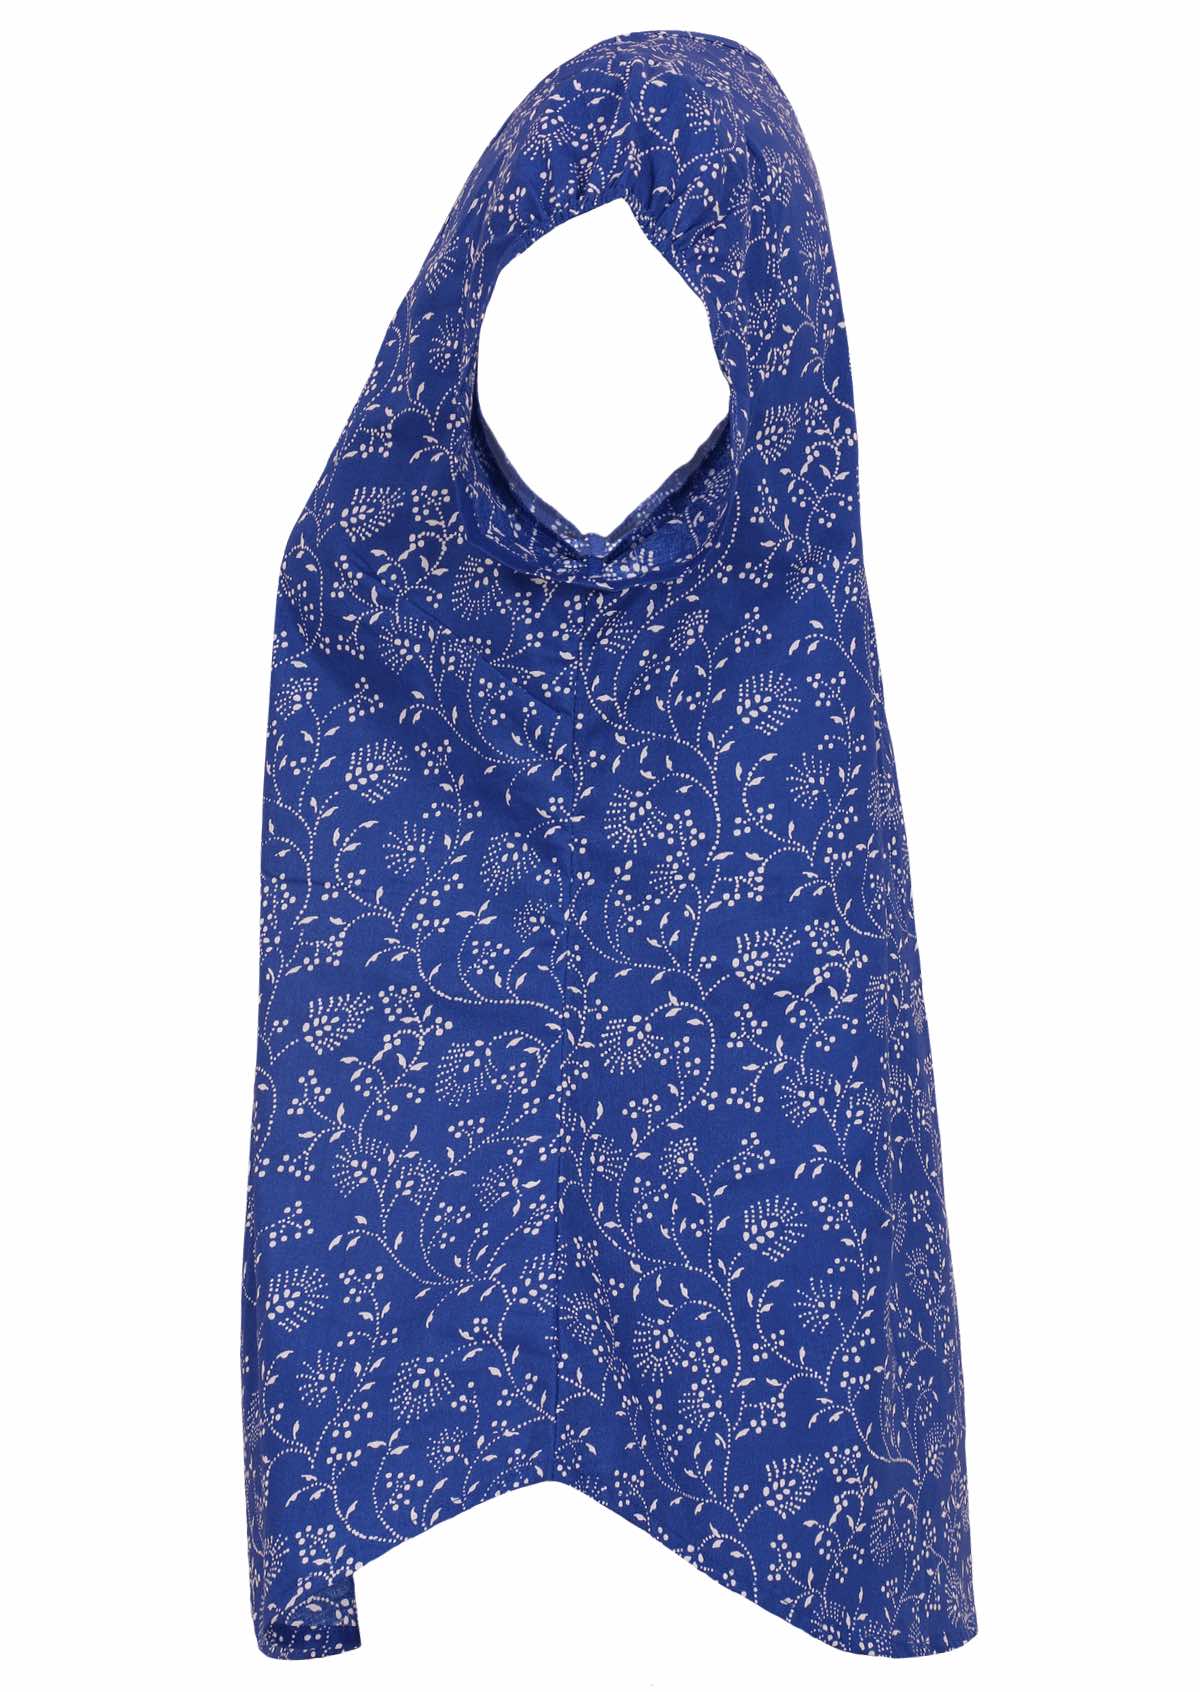 100% cotton top with a low round neckline in blue with white florals. 